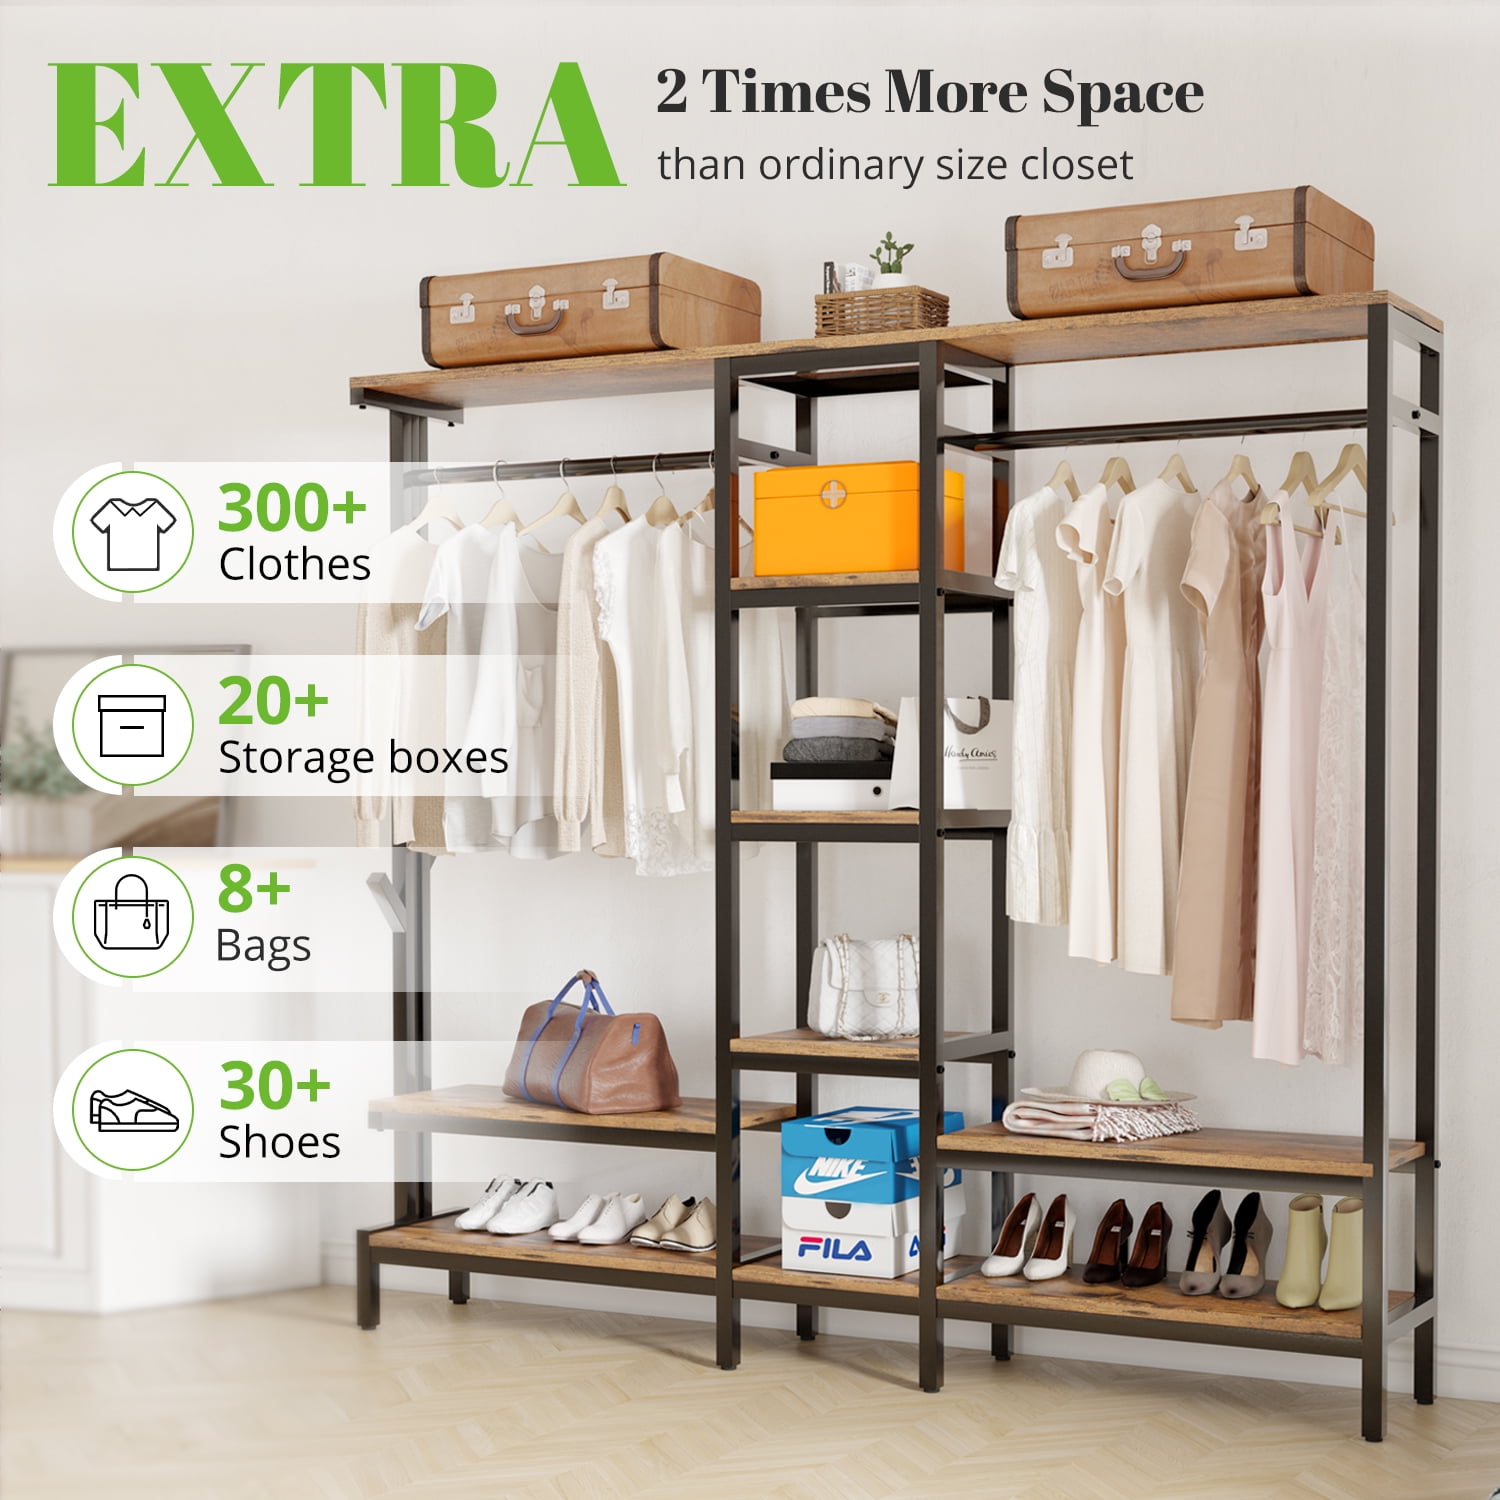 HOKEEPER Free Standing Closet Organizer with Drawers and Hooks